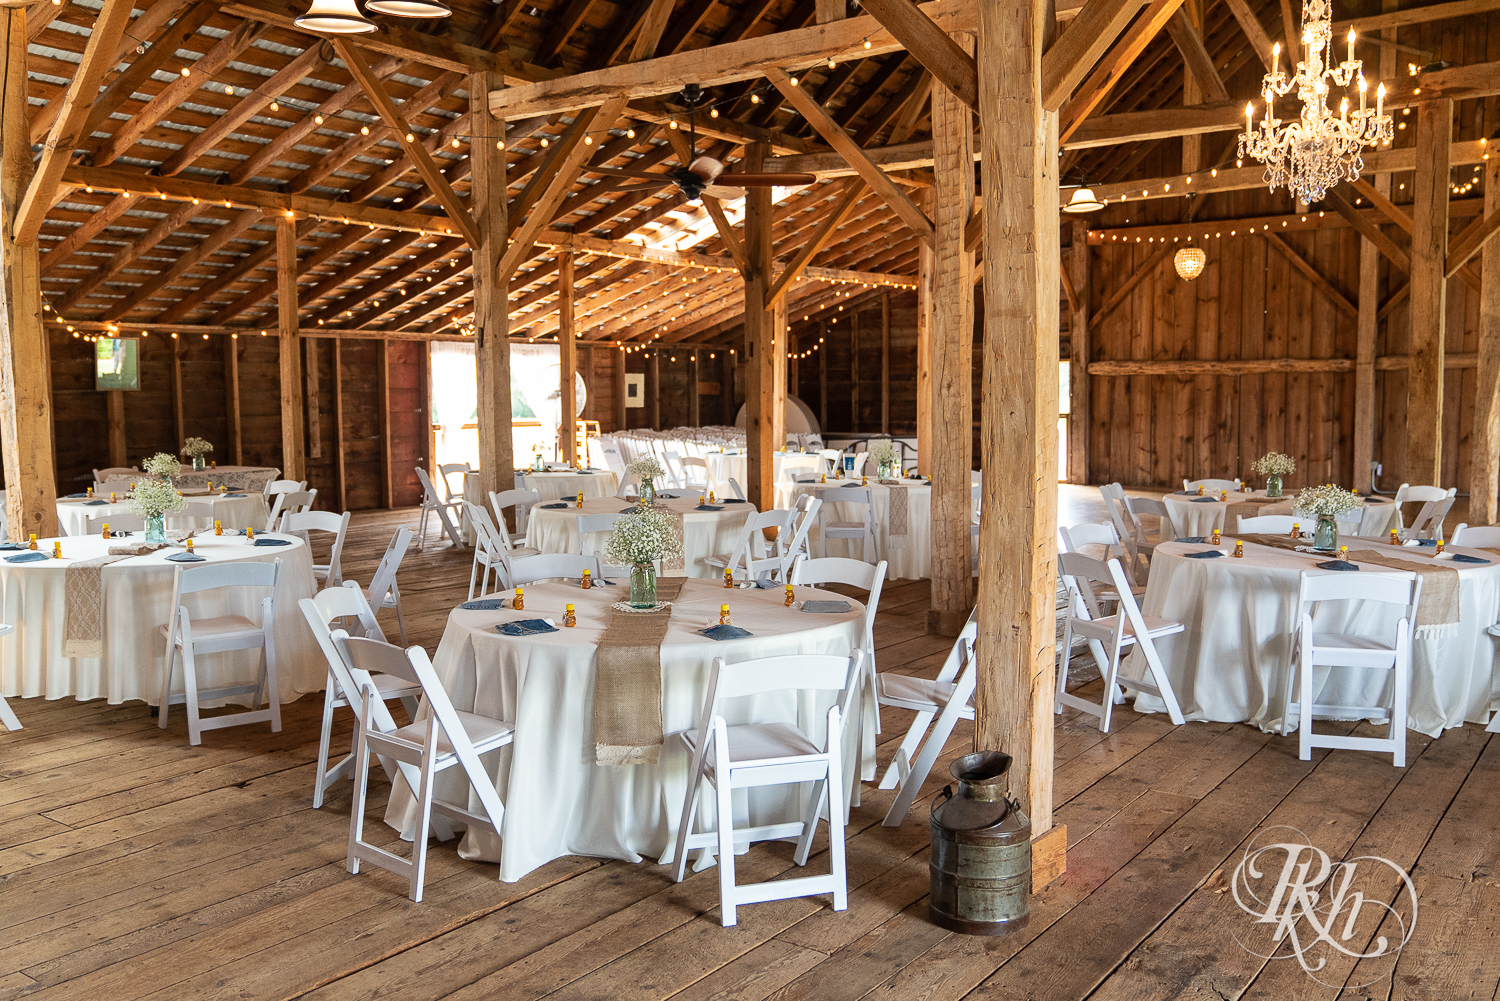 Indoor country barn wedding ceremony setup at Croix View Farm in Osceola, Wisconsin.